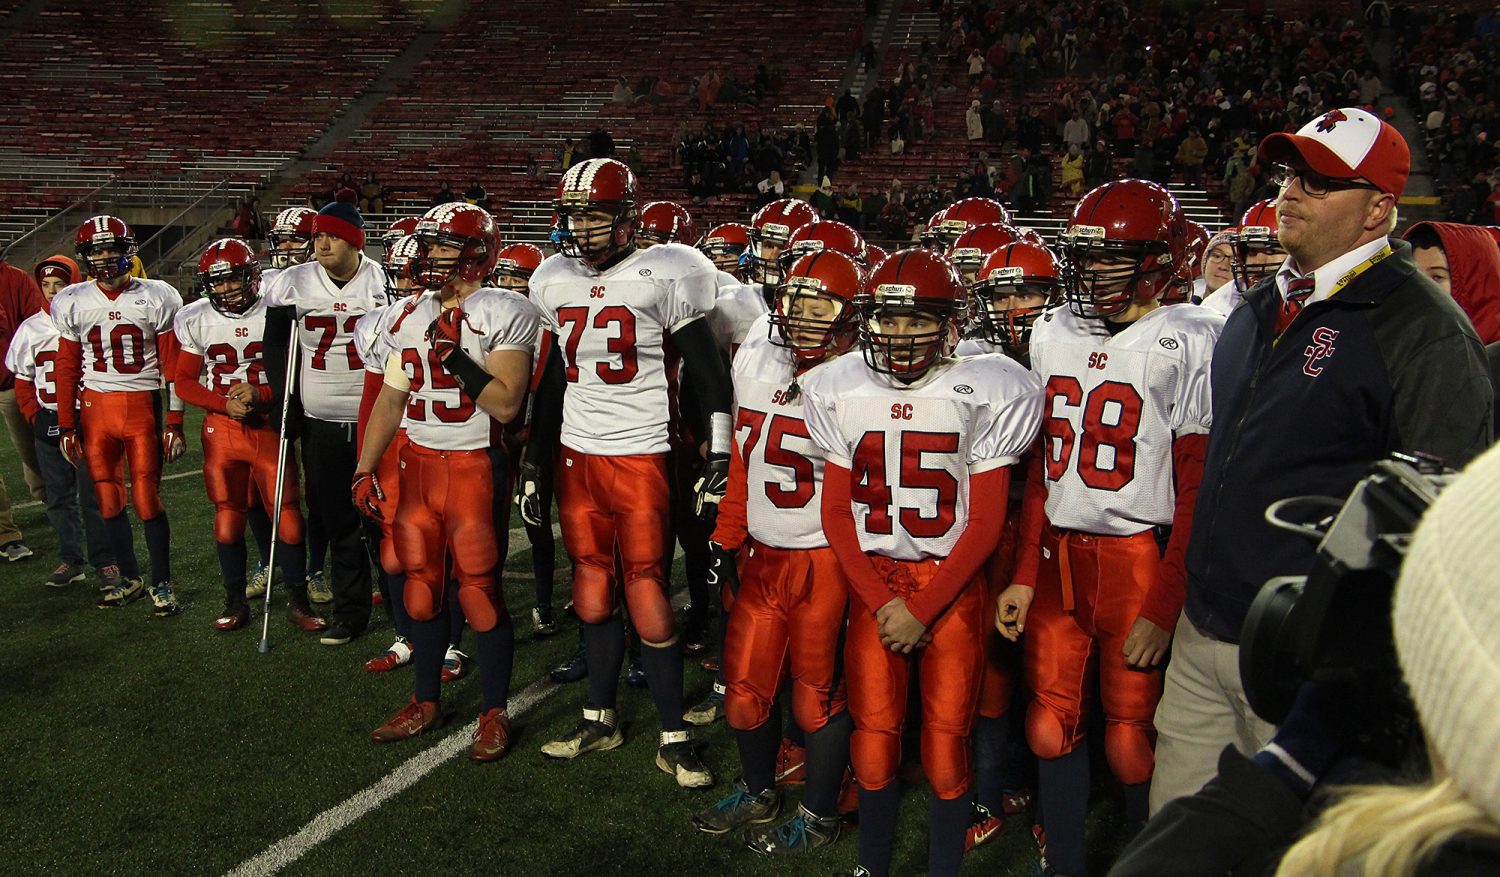 A disappointed Spencer/Columbus team waits to get its second place trophy after the Rockets lost to Amherst 42-0 in the WIAA Division 5 State Championship Game at Camp Randall Stadium in Madison, Thursday, Nov. 19, 2015.